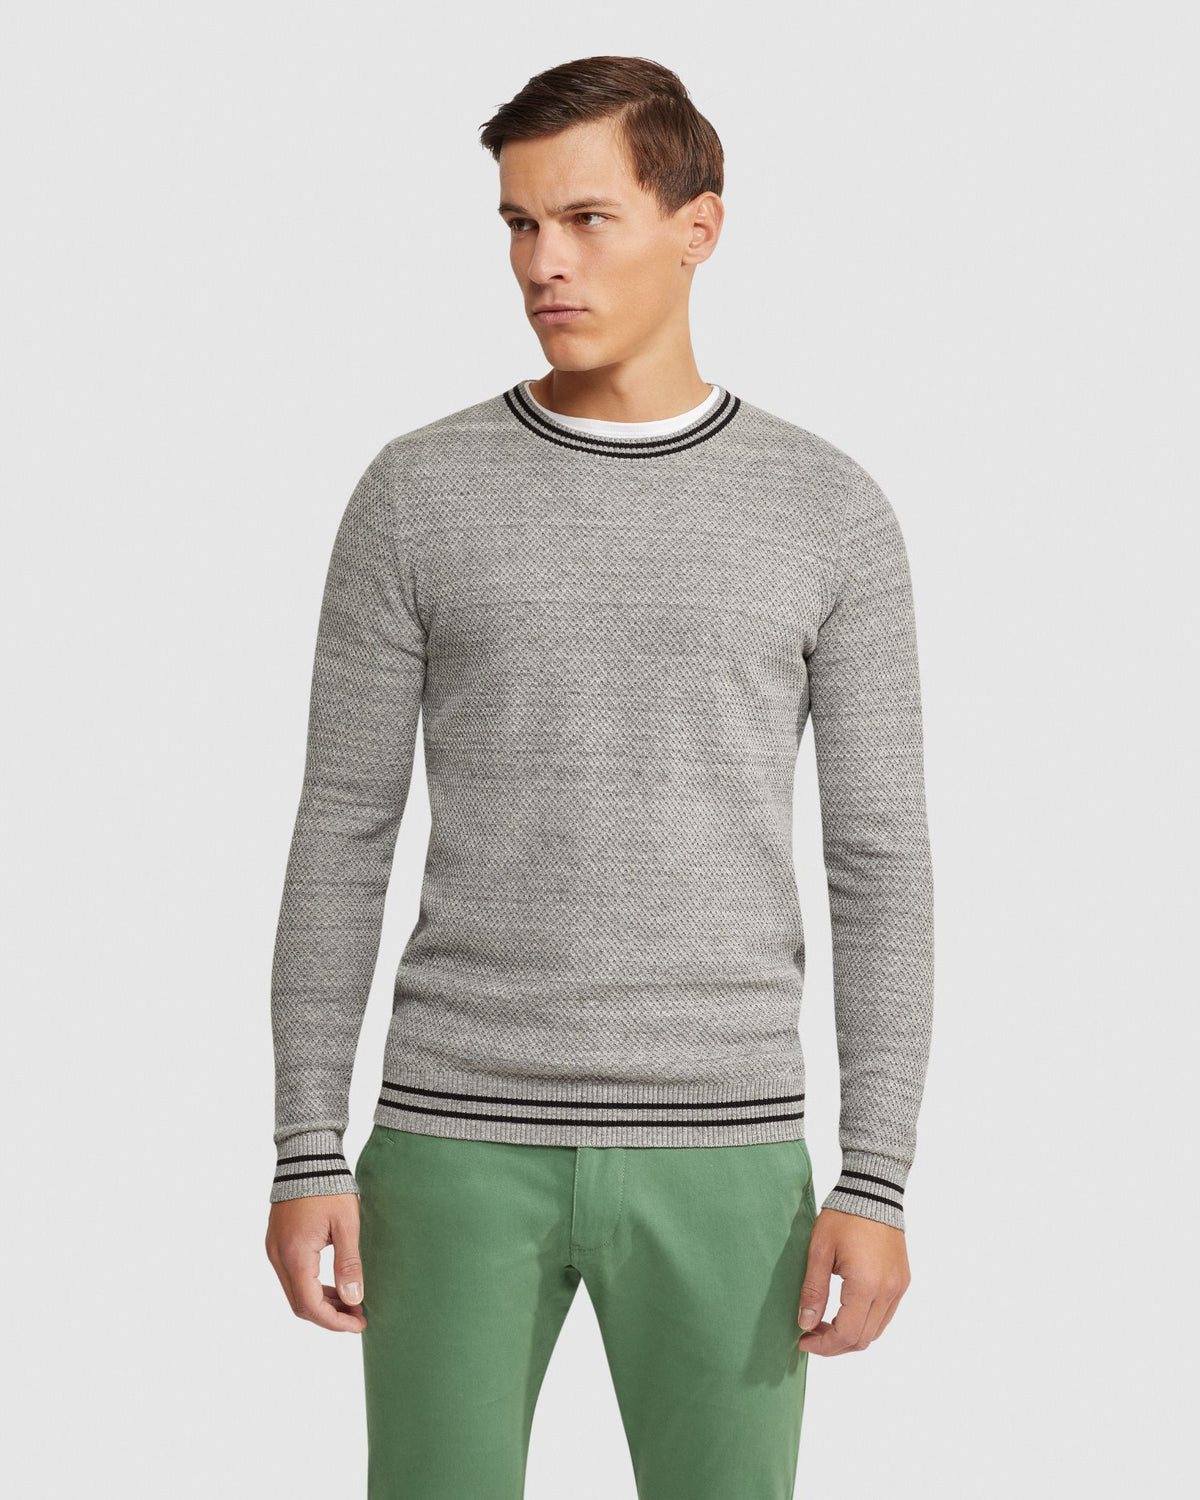 JACK TEXTURED COTTON TIPPING KNIT MENS KNITWEAR